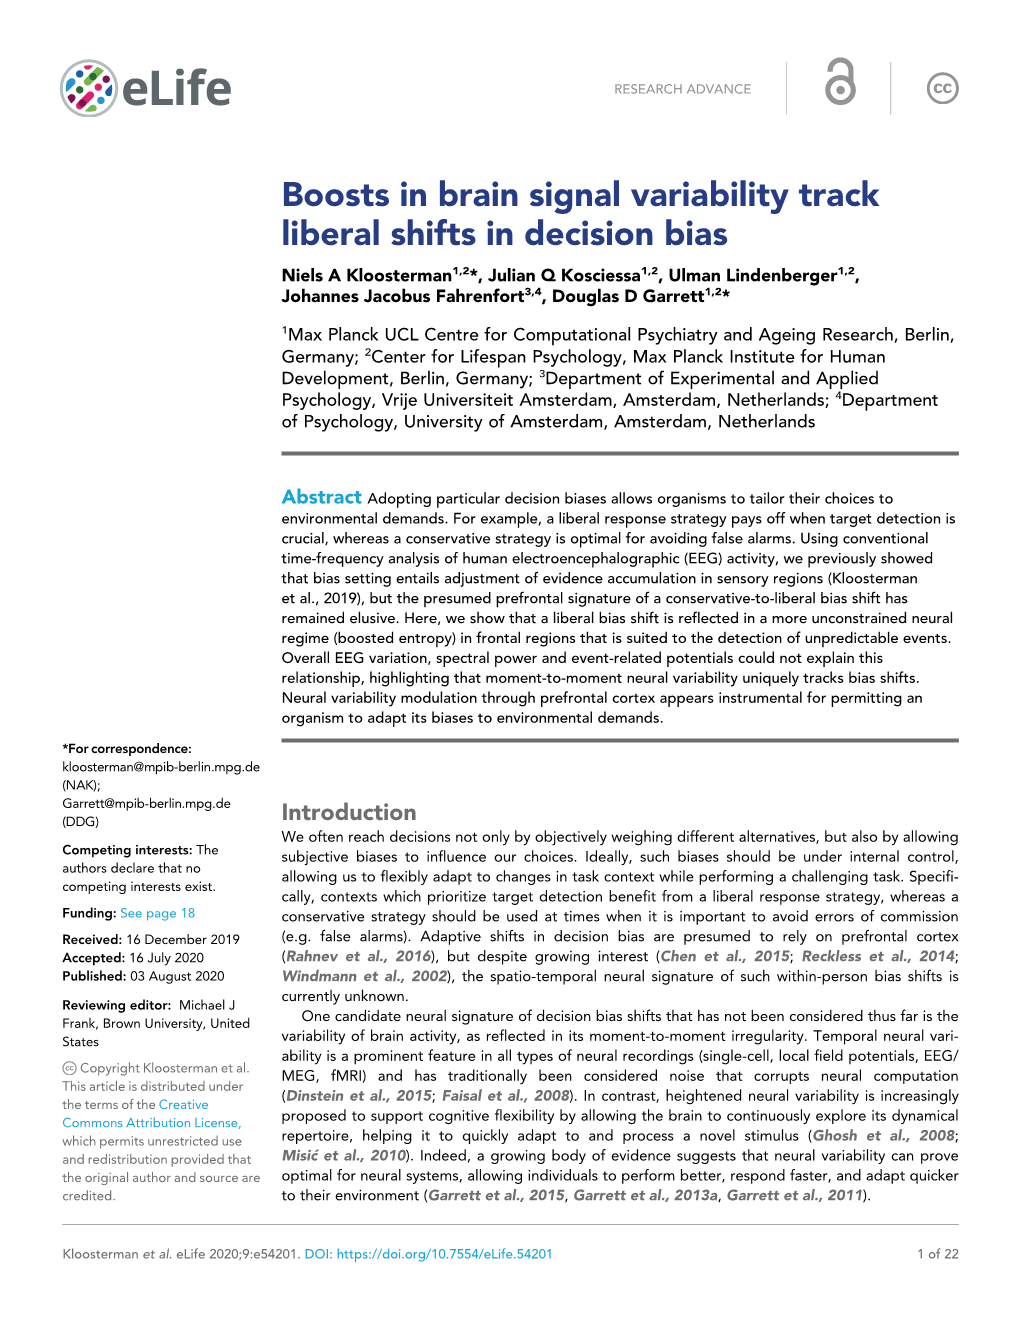 Boosts in Brain Signal Variability Track Liberal Shifts in Decision Bias